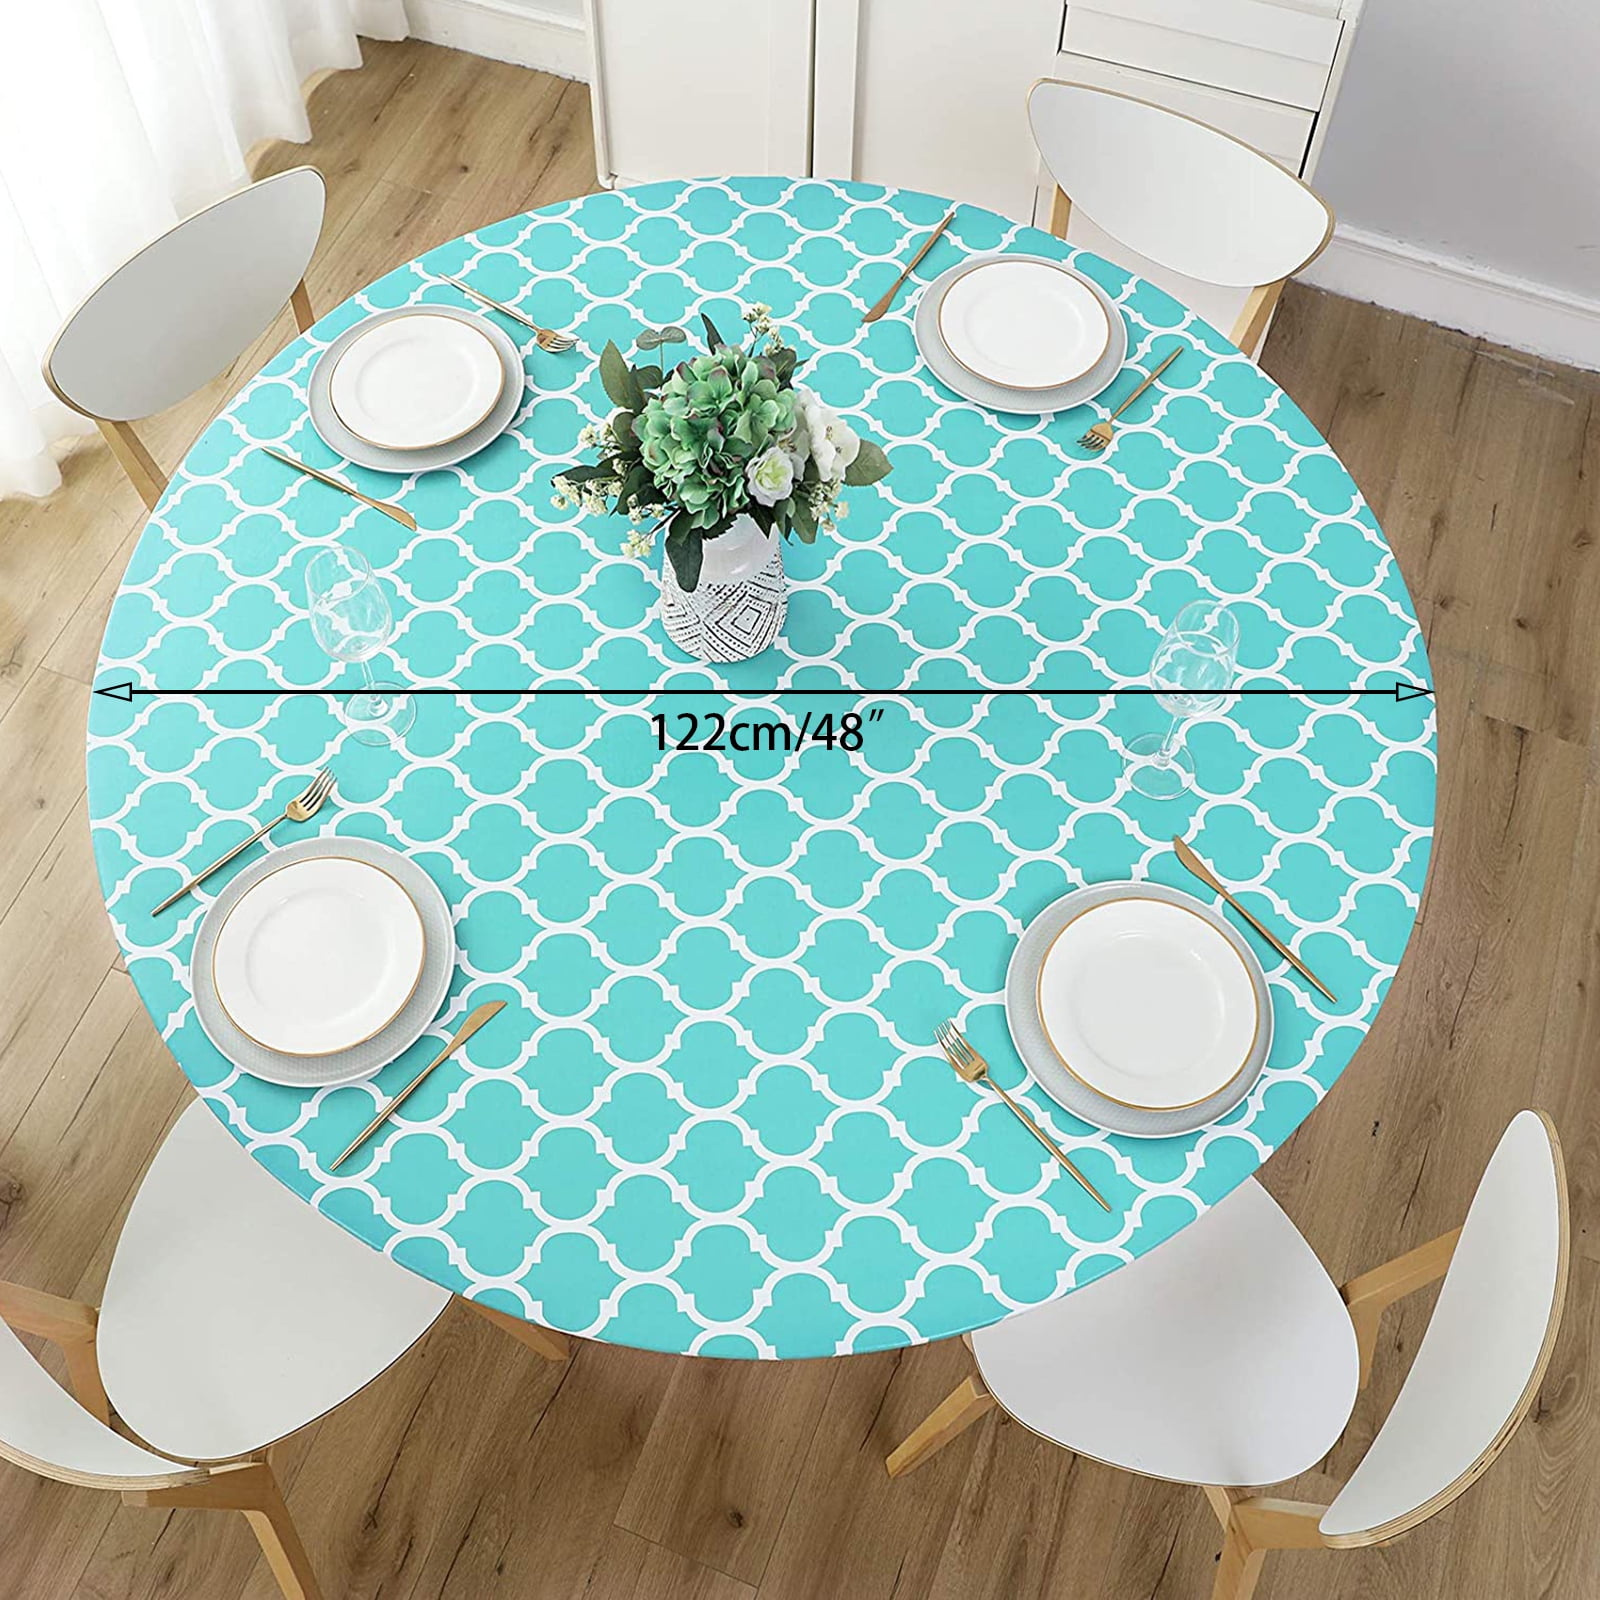 FITTED Vinyl Table Cover Pineapple Elasticized Round Oval/Oblong Backed 